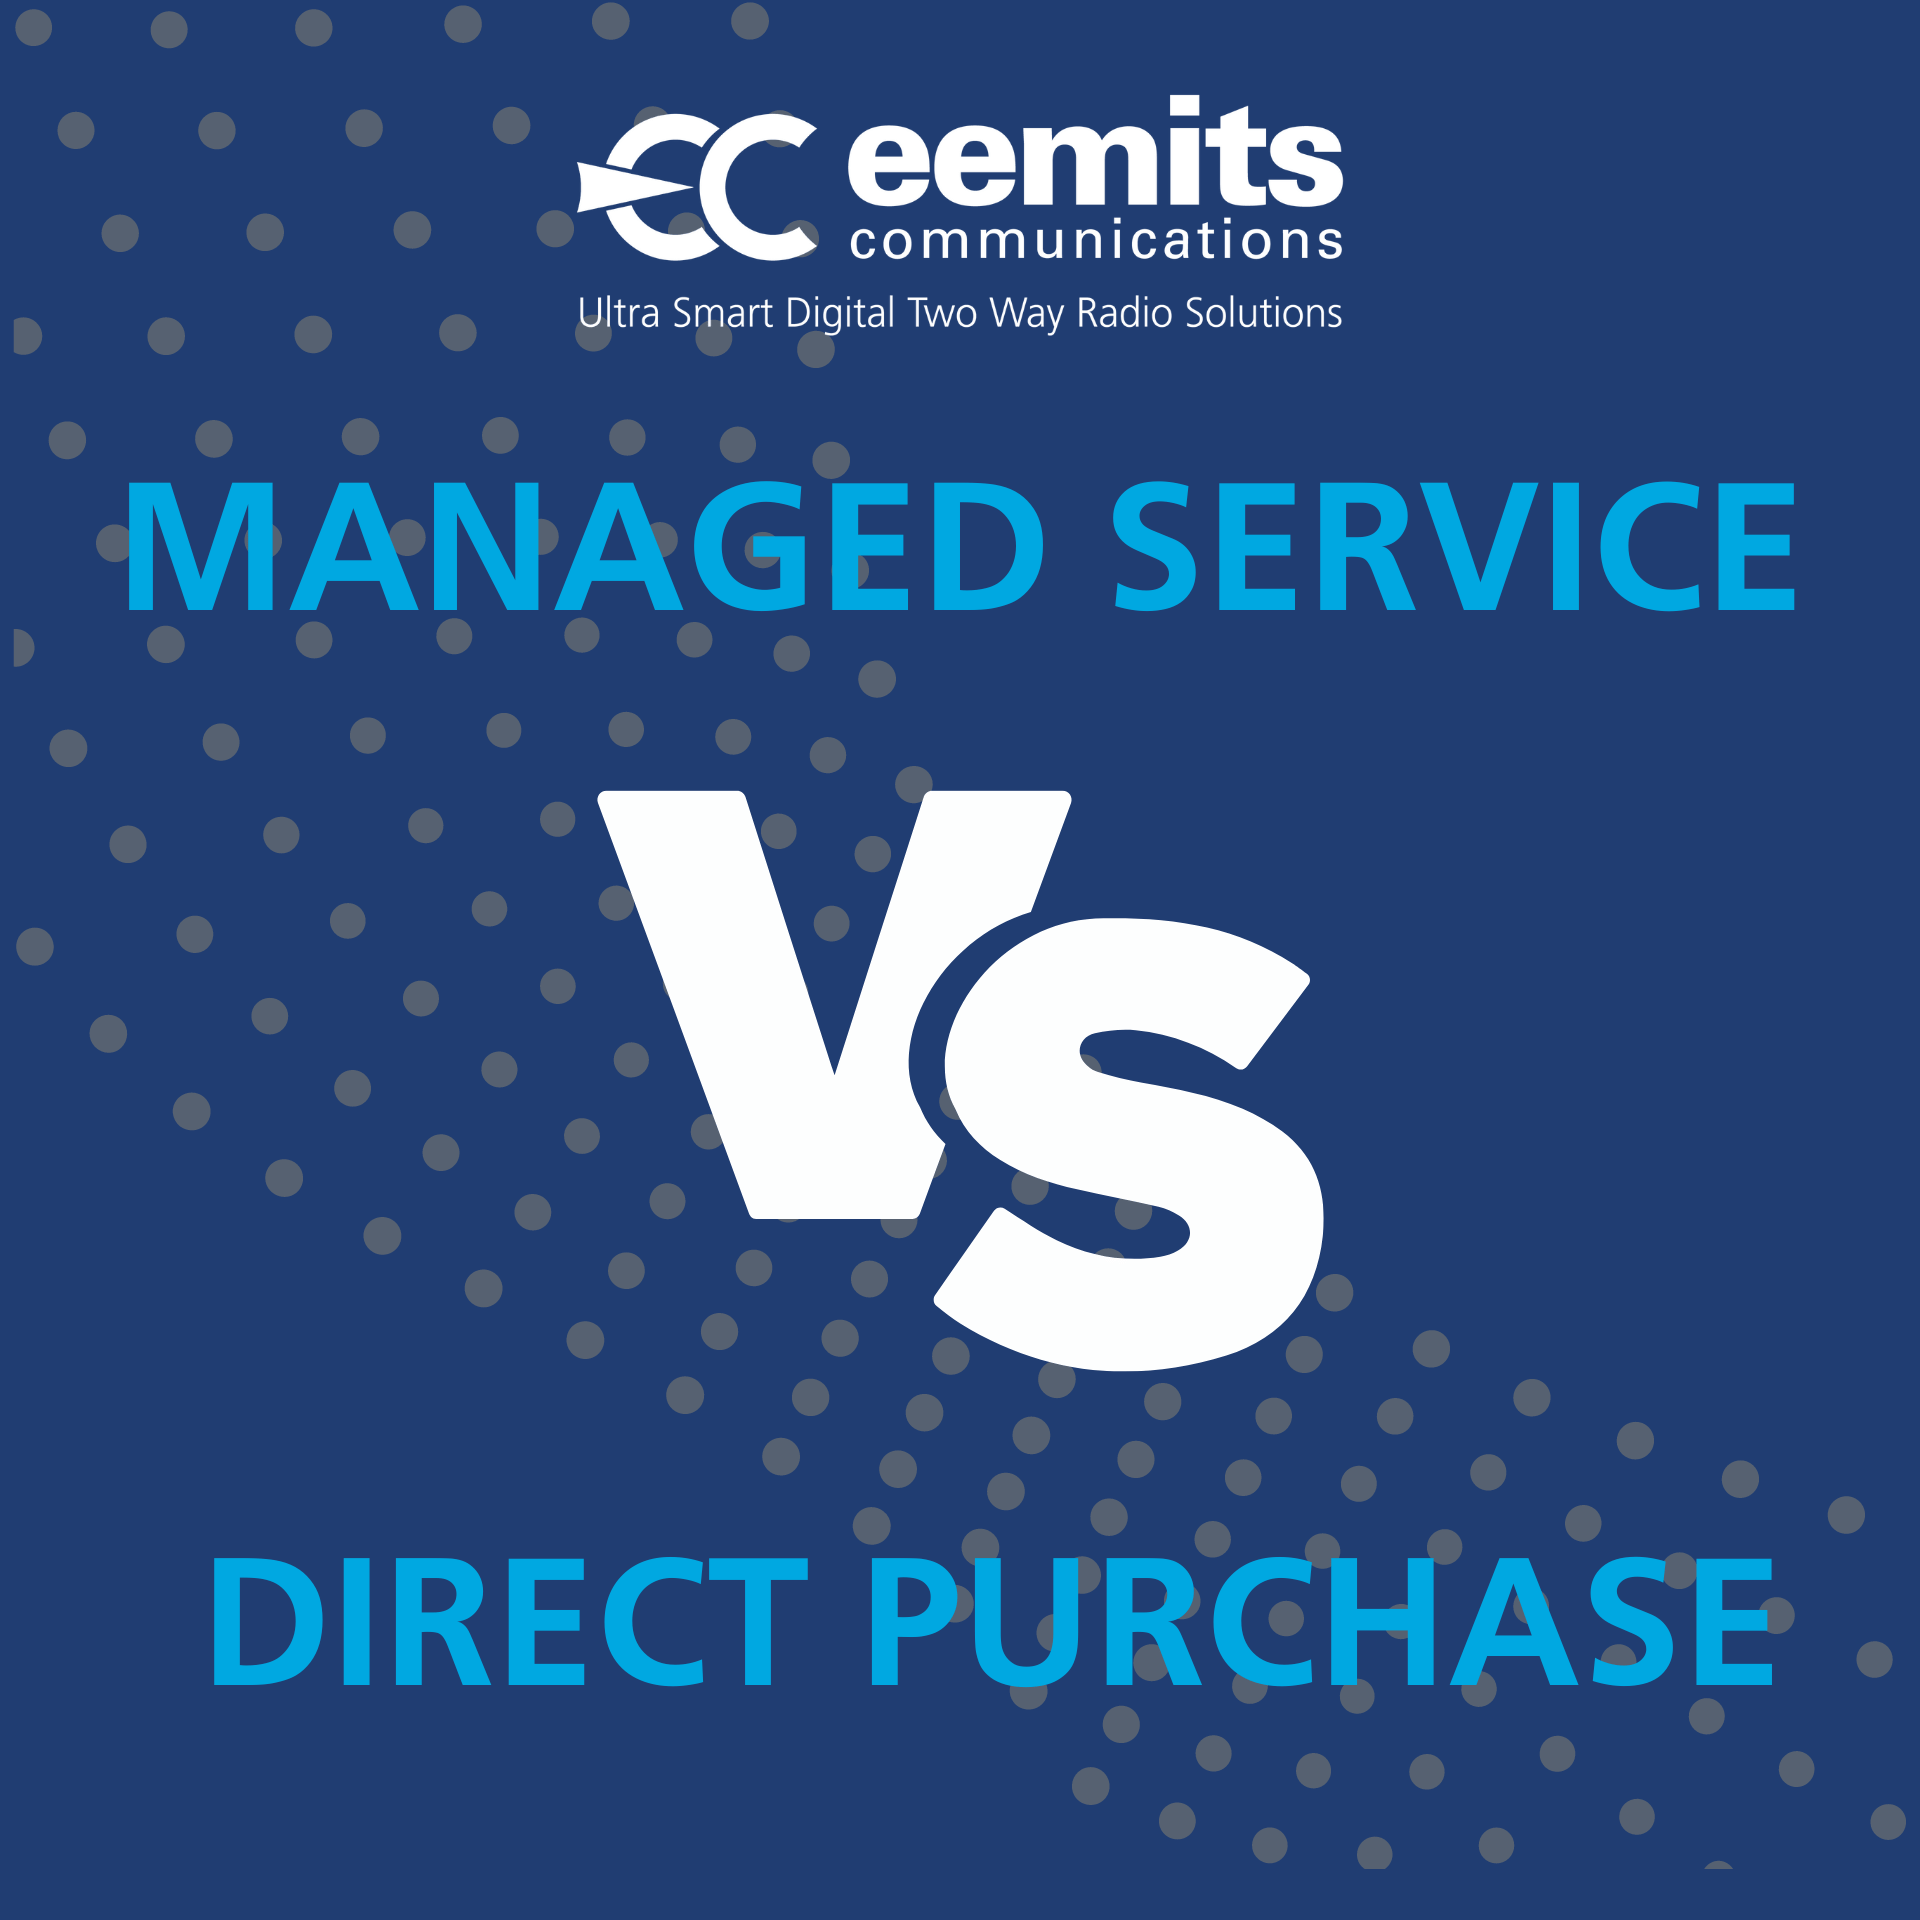 The Key Differences Between Managed Service & Direct Purchase